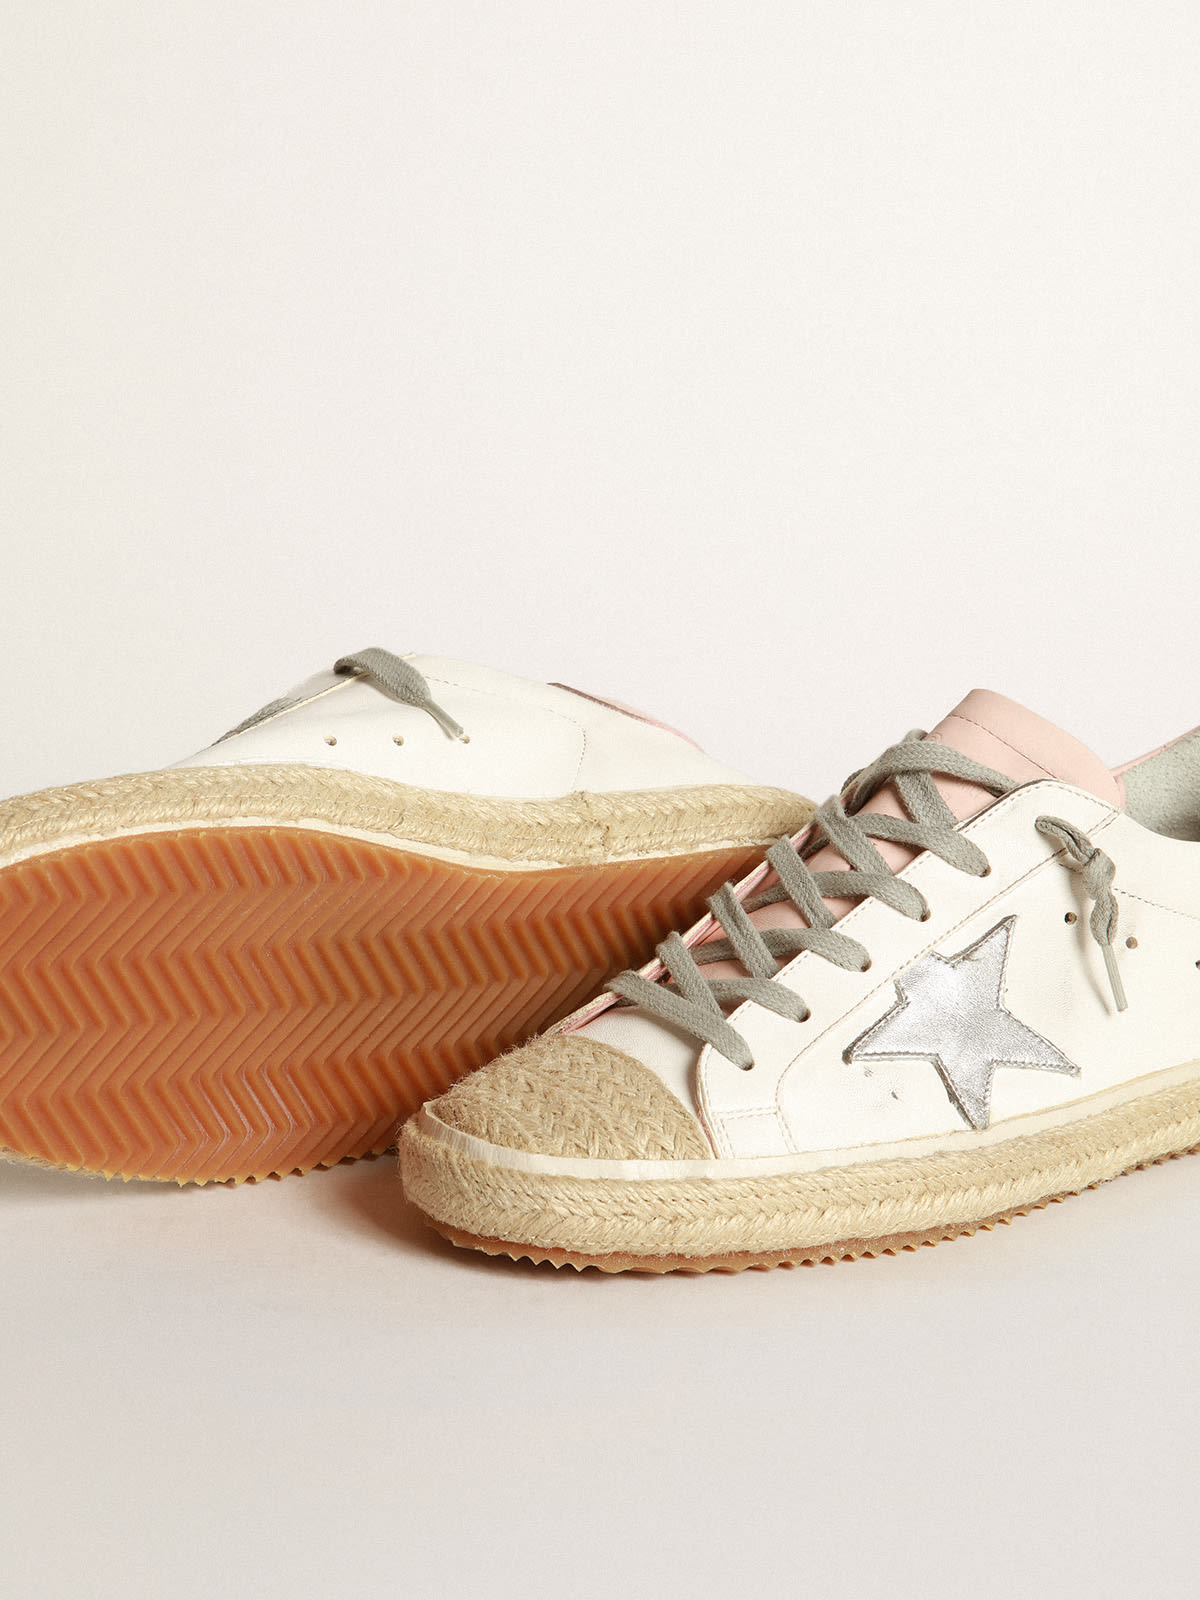 Golden Goose - Super-Star sneakers with rope toe and pink leather tongue in 